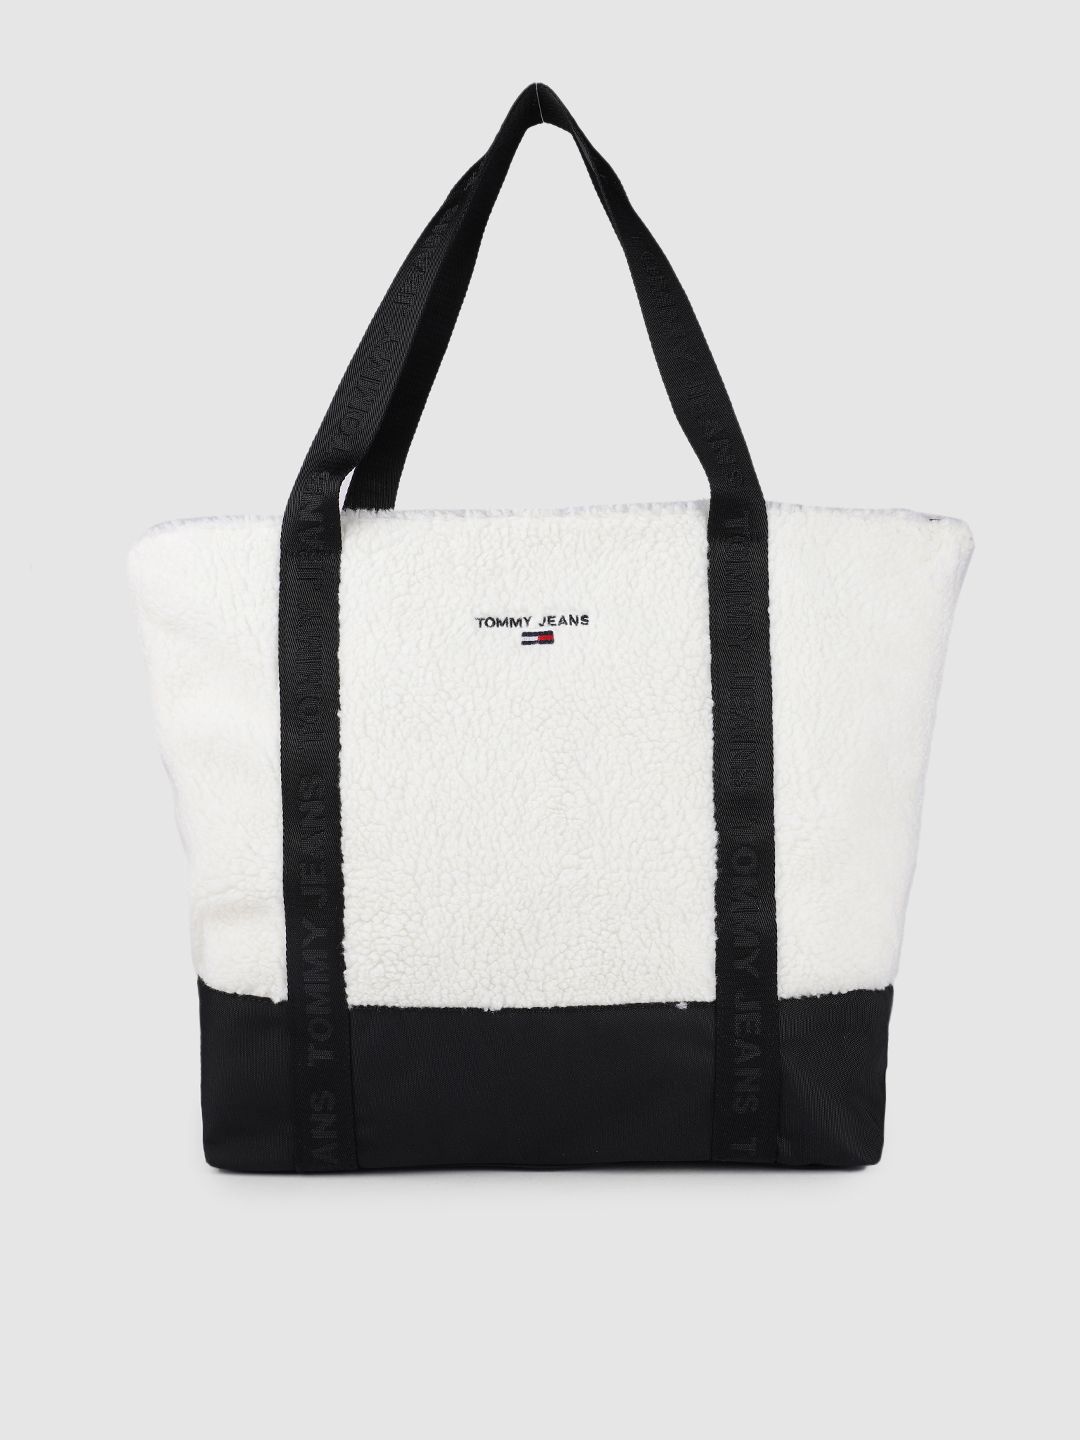 Tommy Hilfiger White Faux Fur Structured Tote Bag Price in India